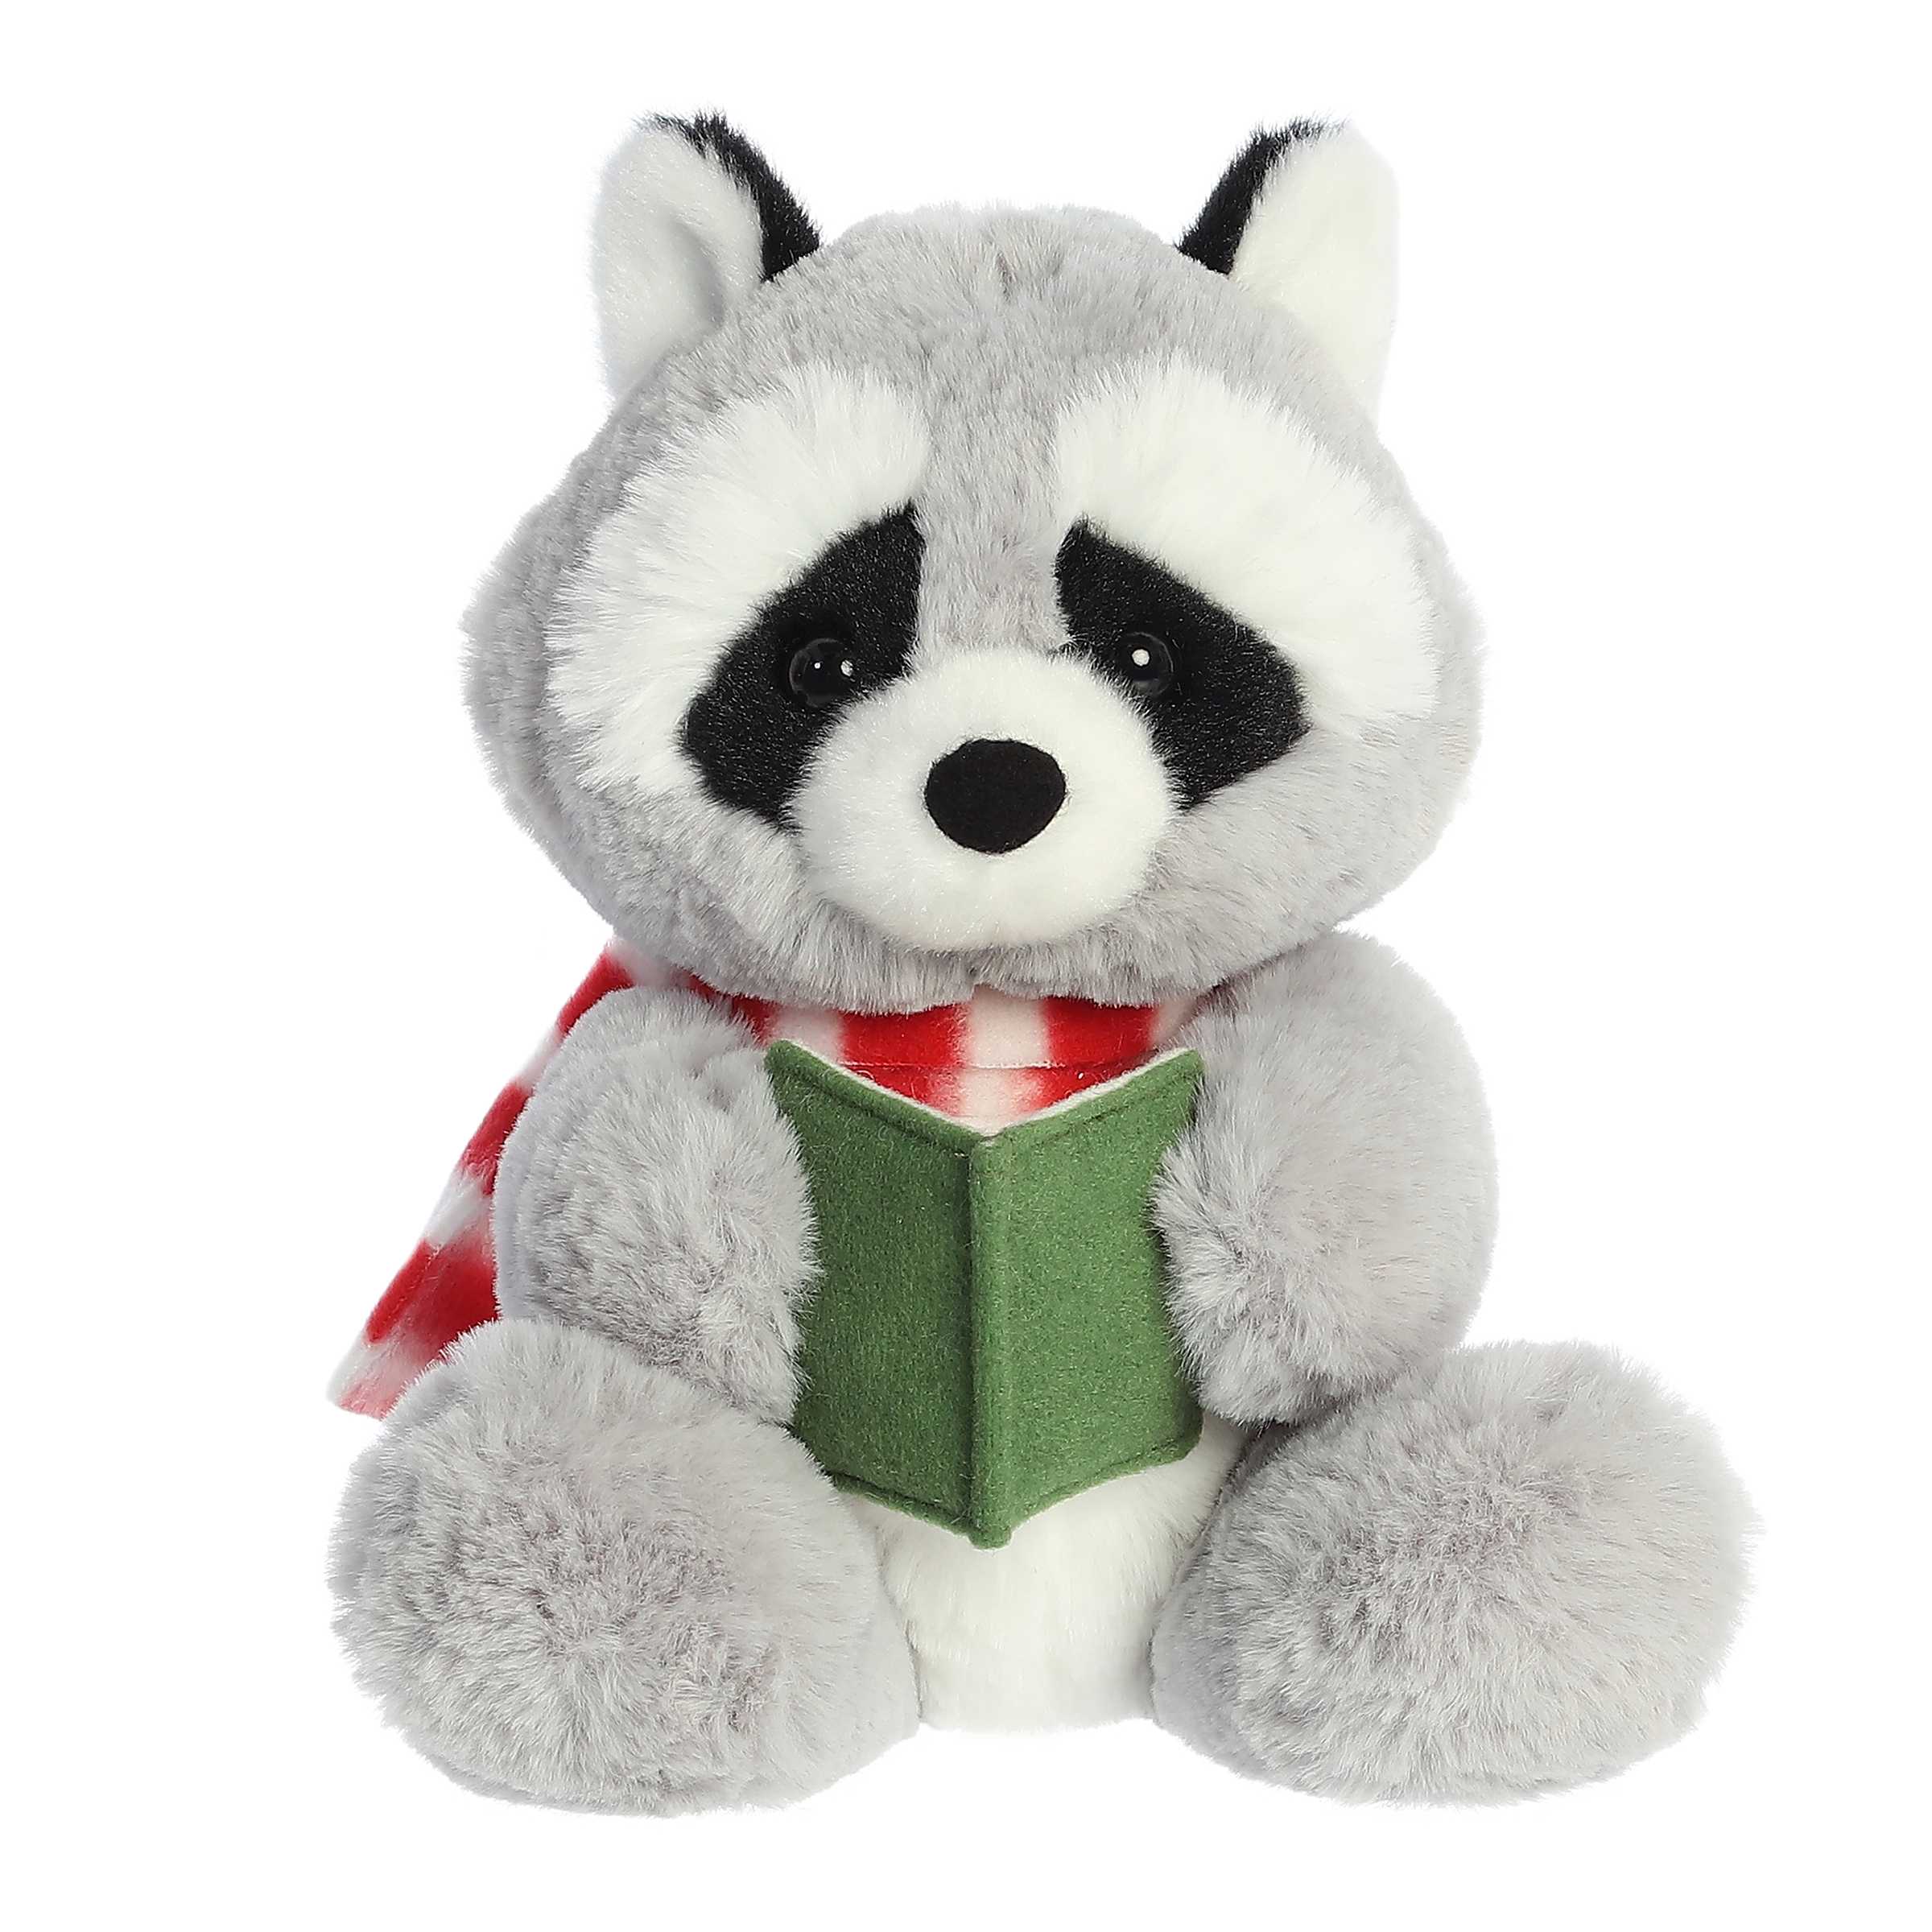 Adorable gray raccoon stuffed animal wearing a cozy red and white striped scarf and holding an open green songbook